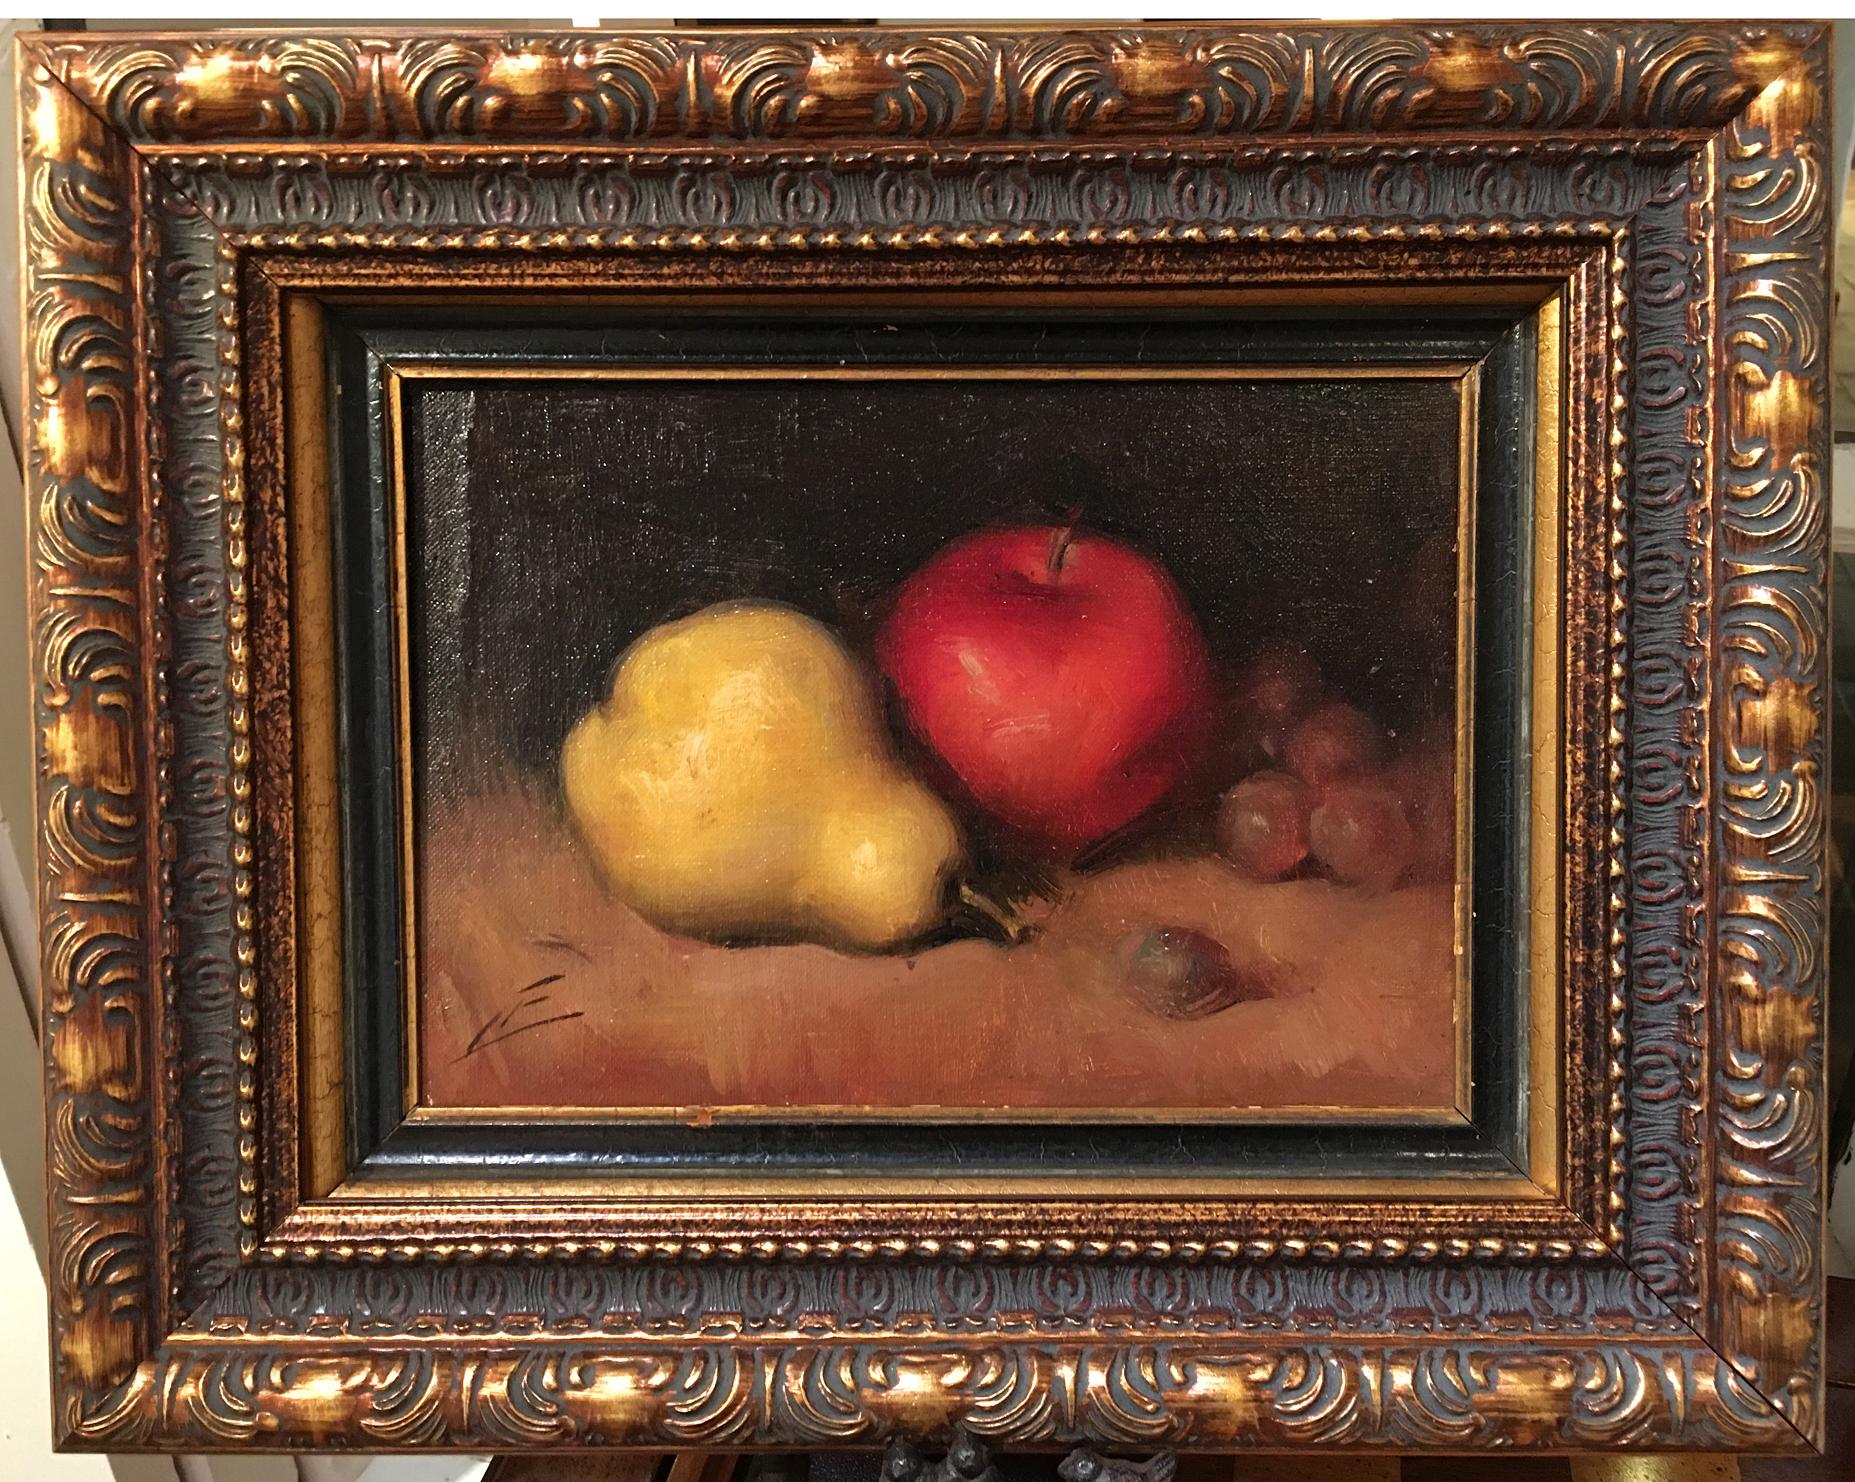 An American Still Life of an Apple, Pear and Grapes circa 1880s